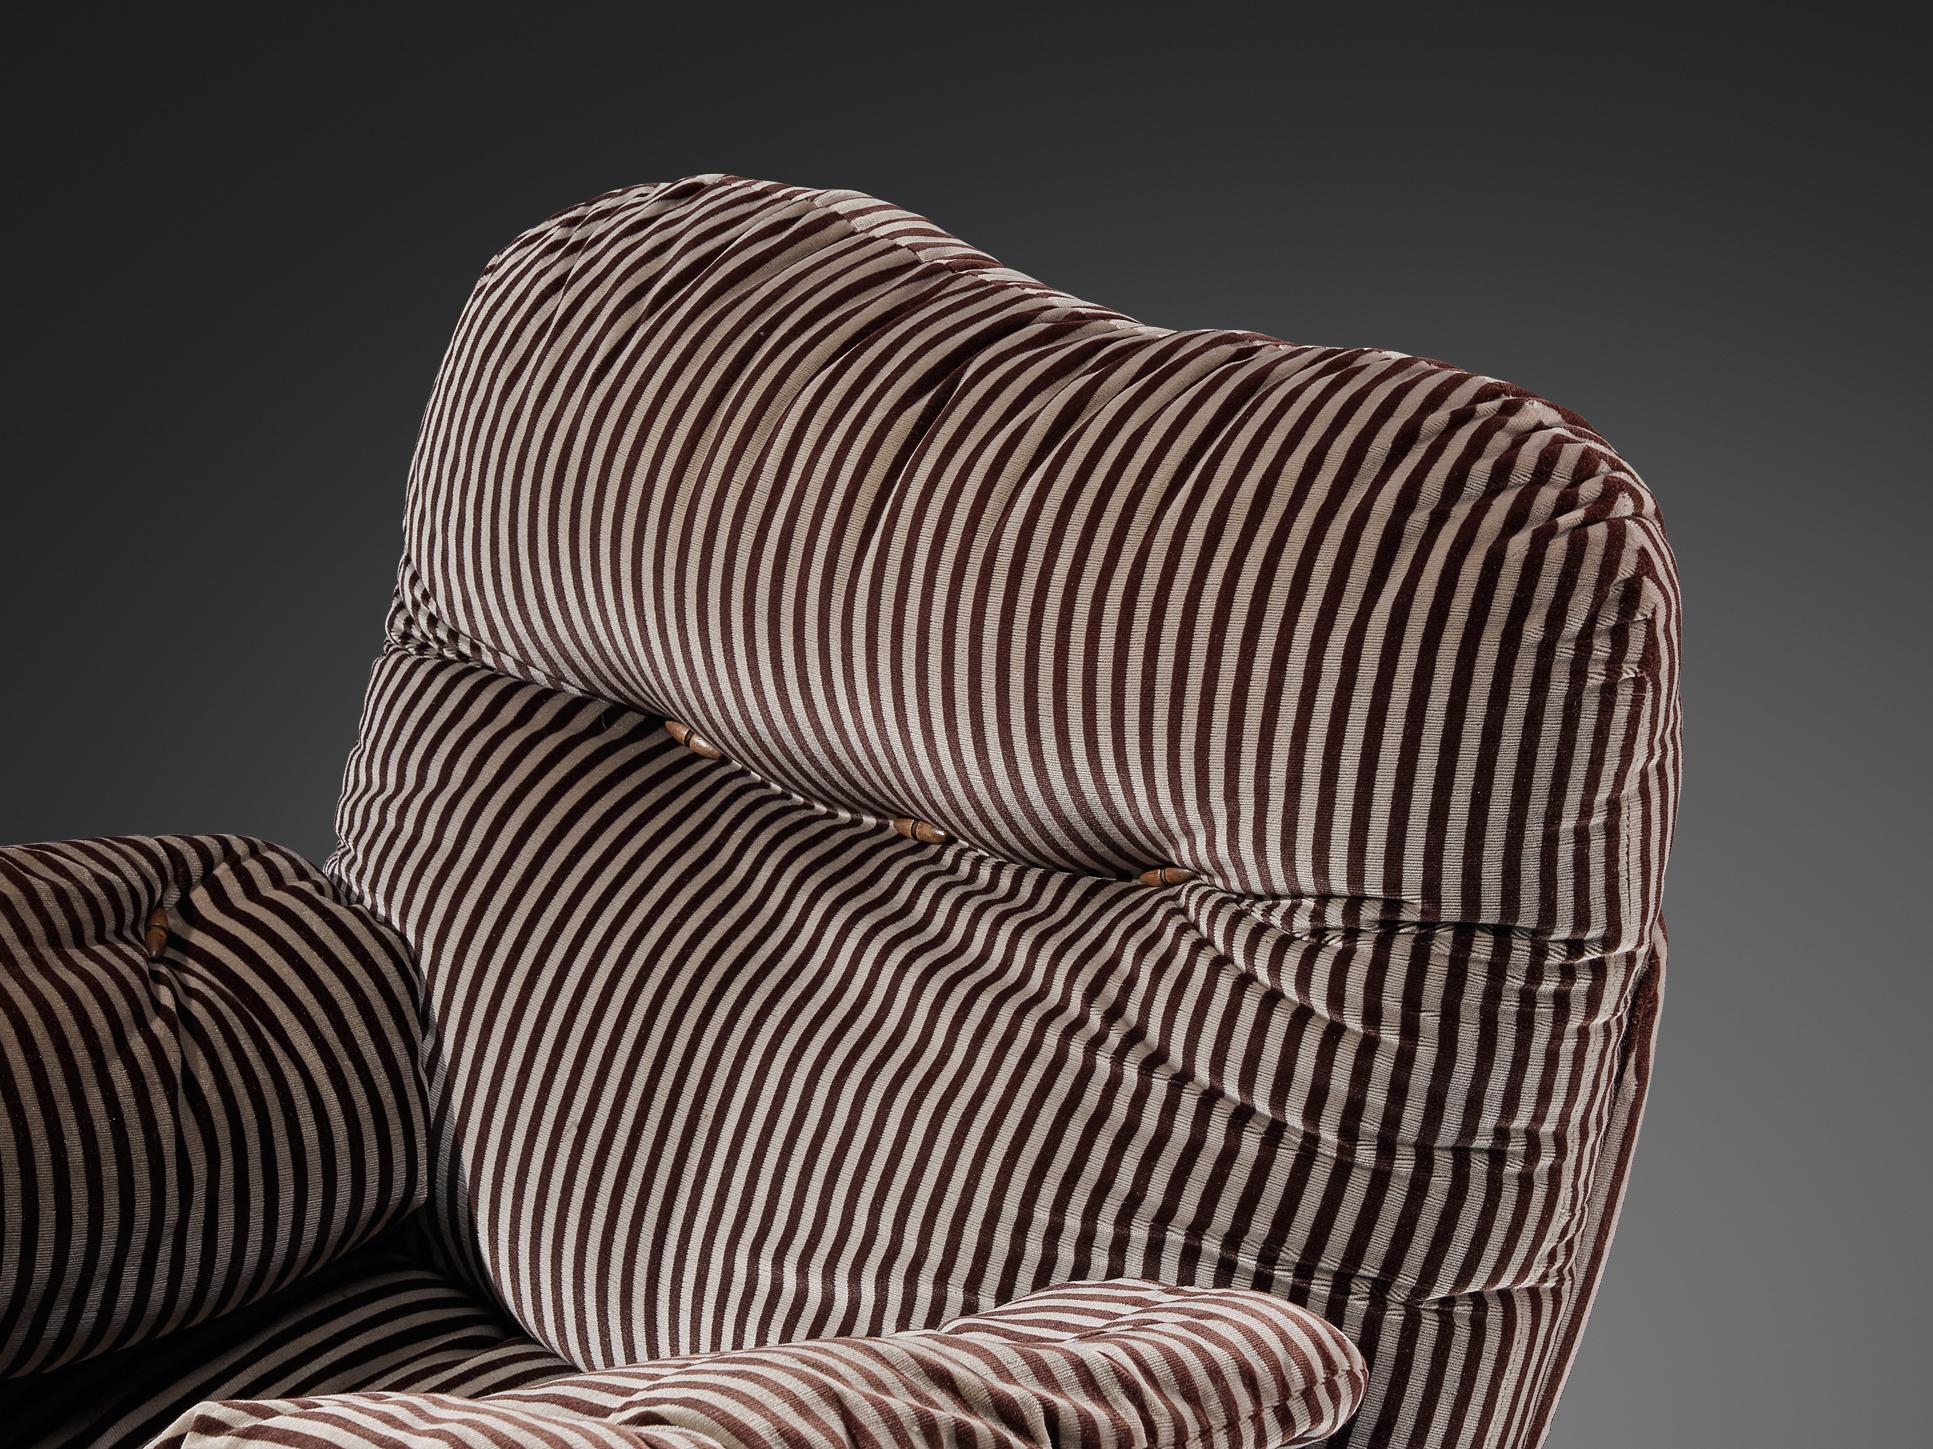 E. Cobianchi for Insa Lounge Chair in Striped Upholstery